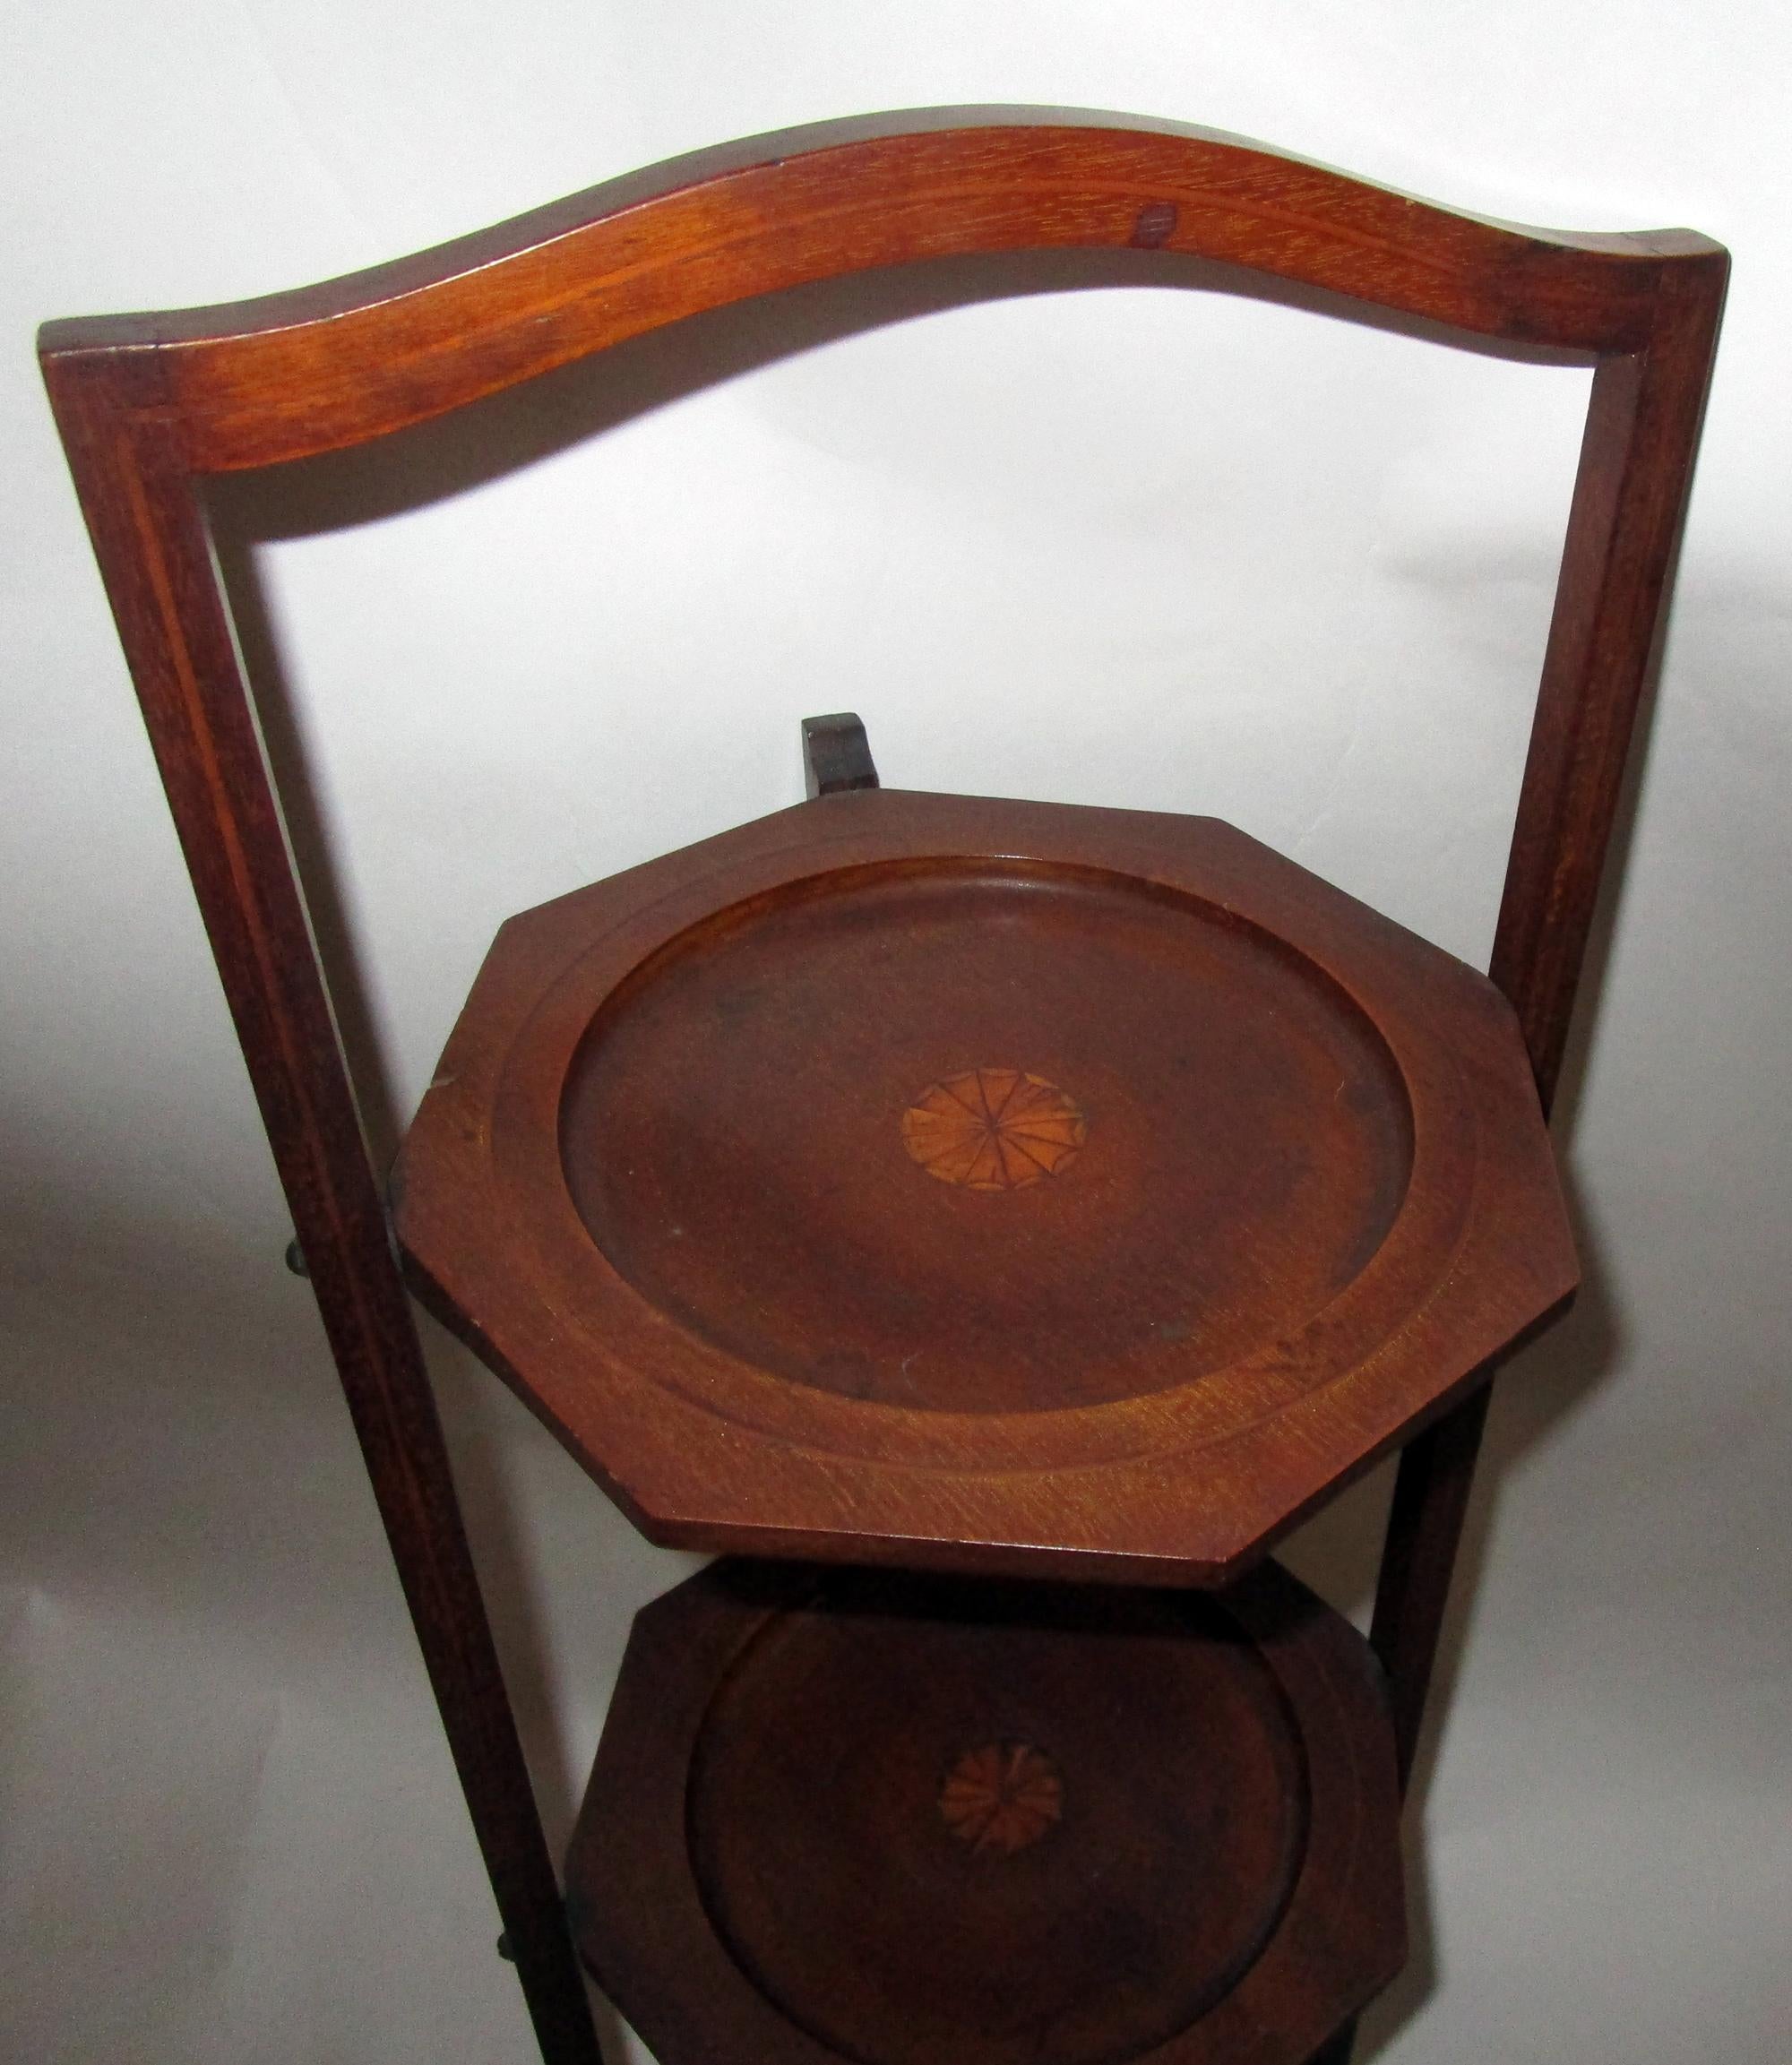 19th century Regency Mahogany Side Table or Muffin Stand im Zustand „Gut“ in Savannah, GA